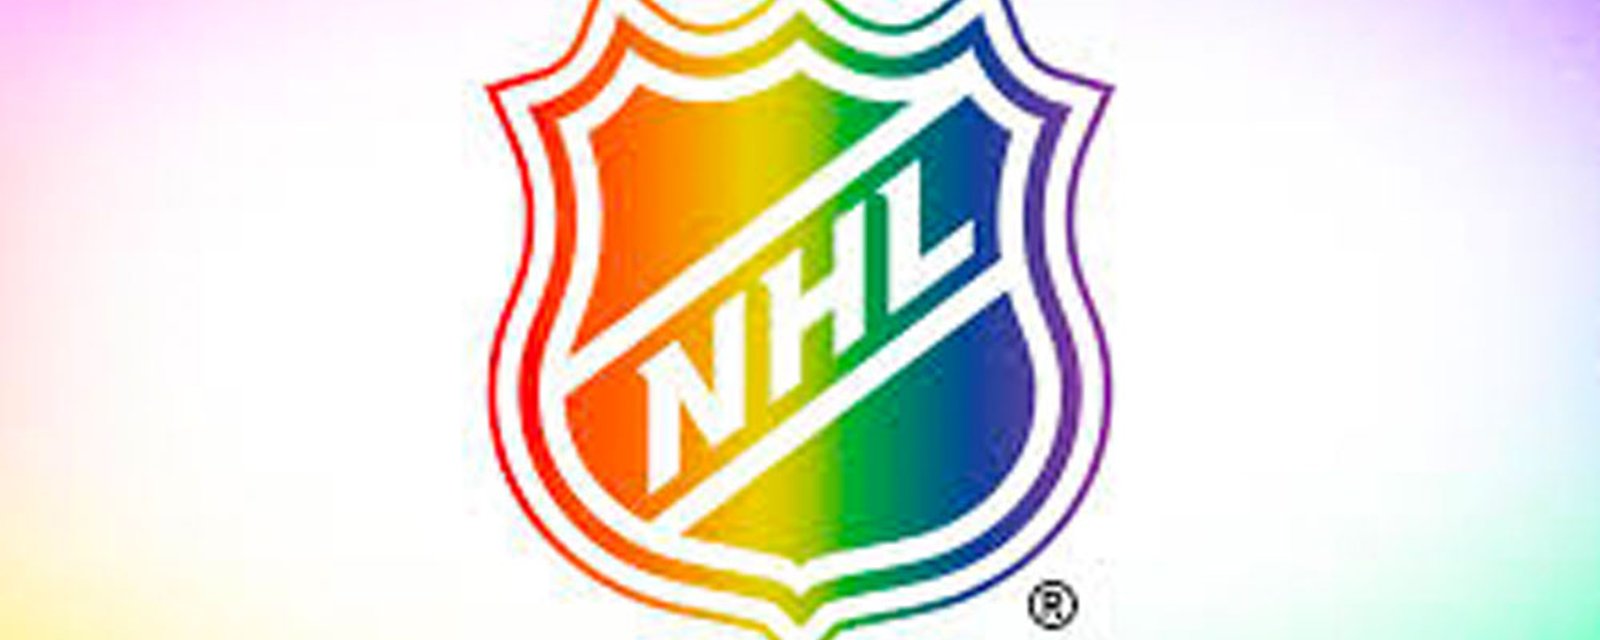 Report: NHL looking at cancelling Pride Night celebrations